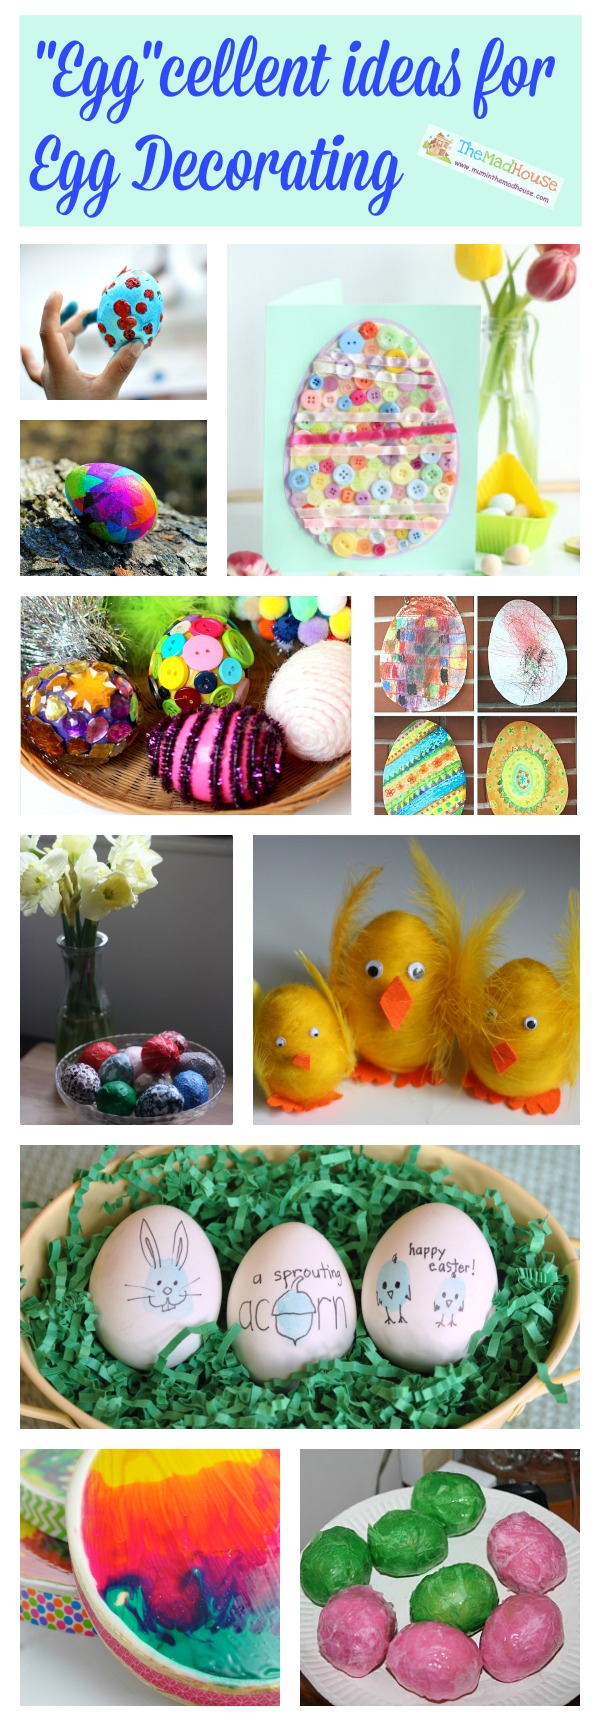 eggcellent ideas for egg decorating this easter